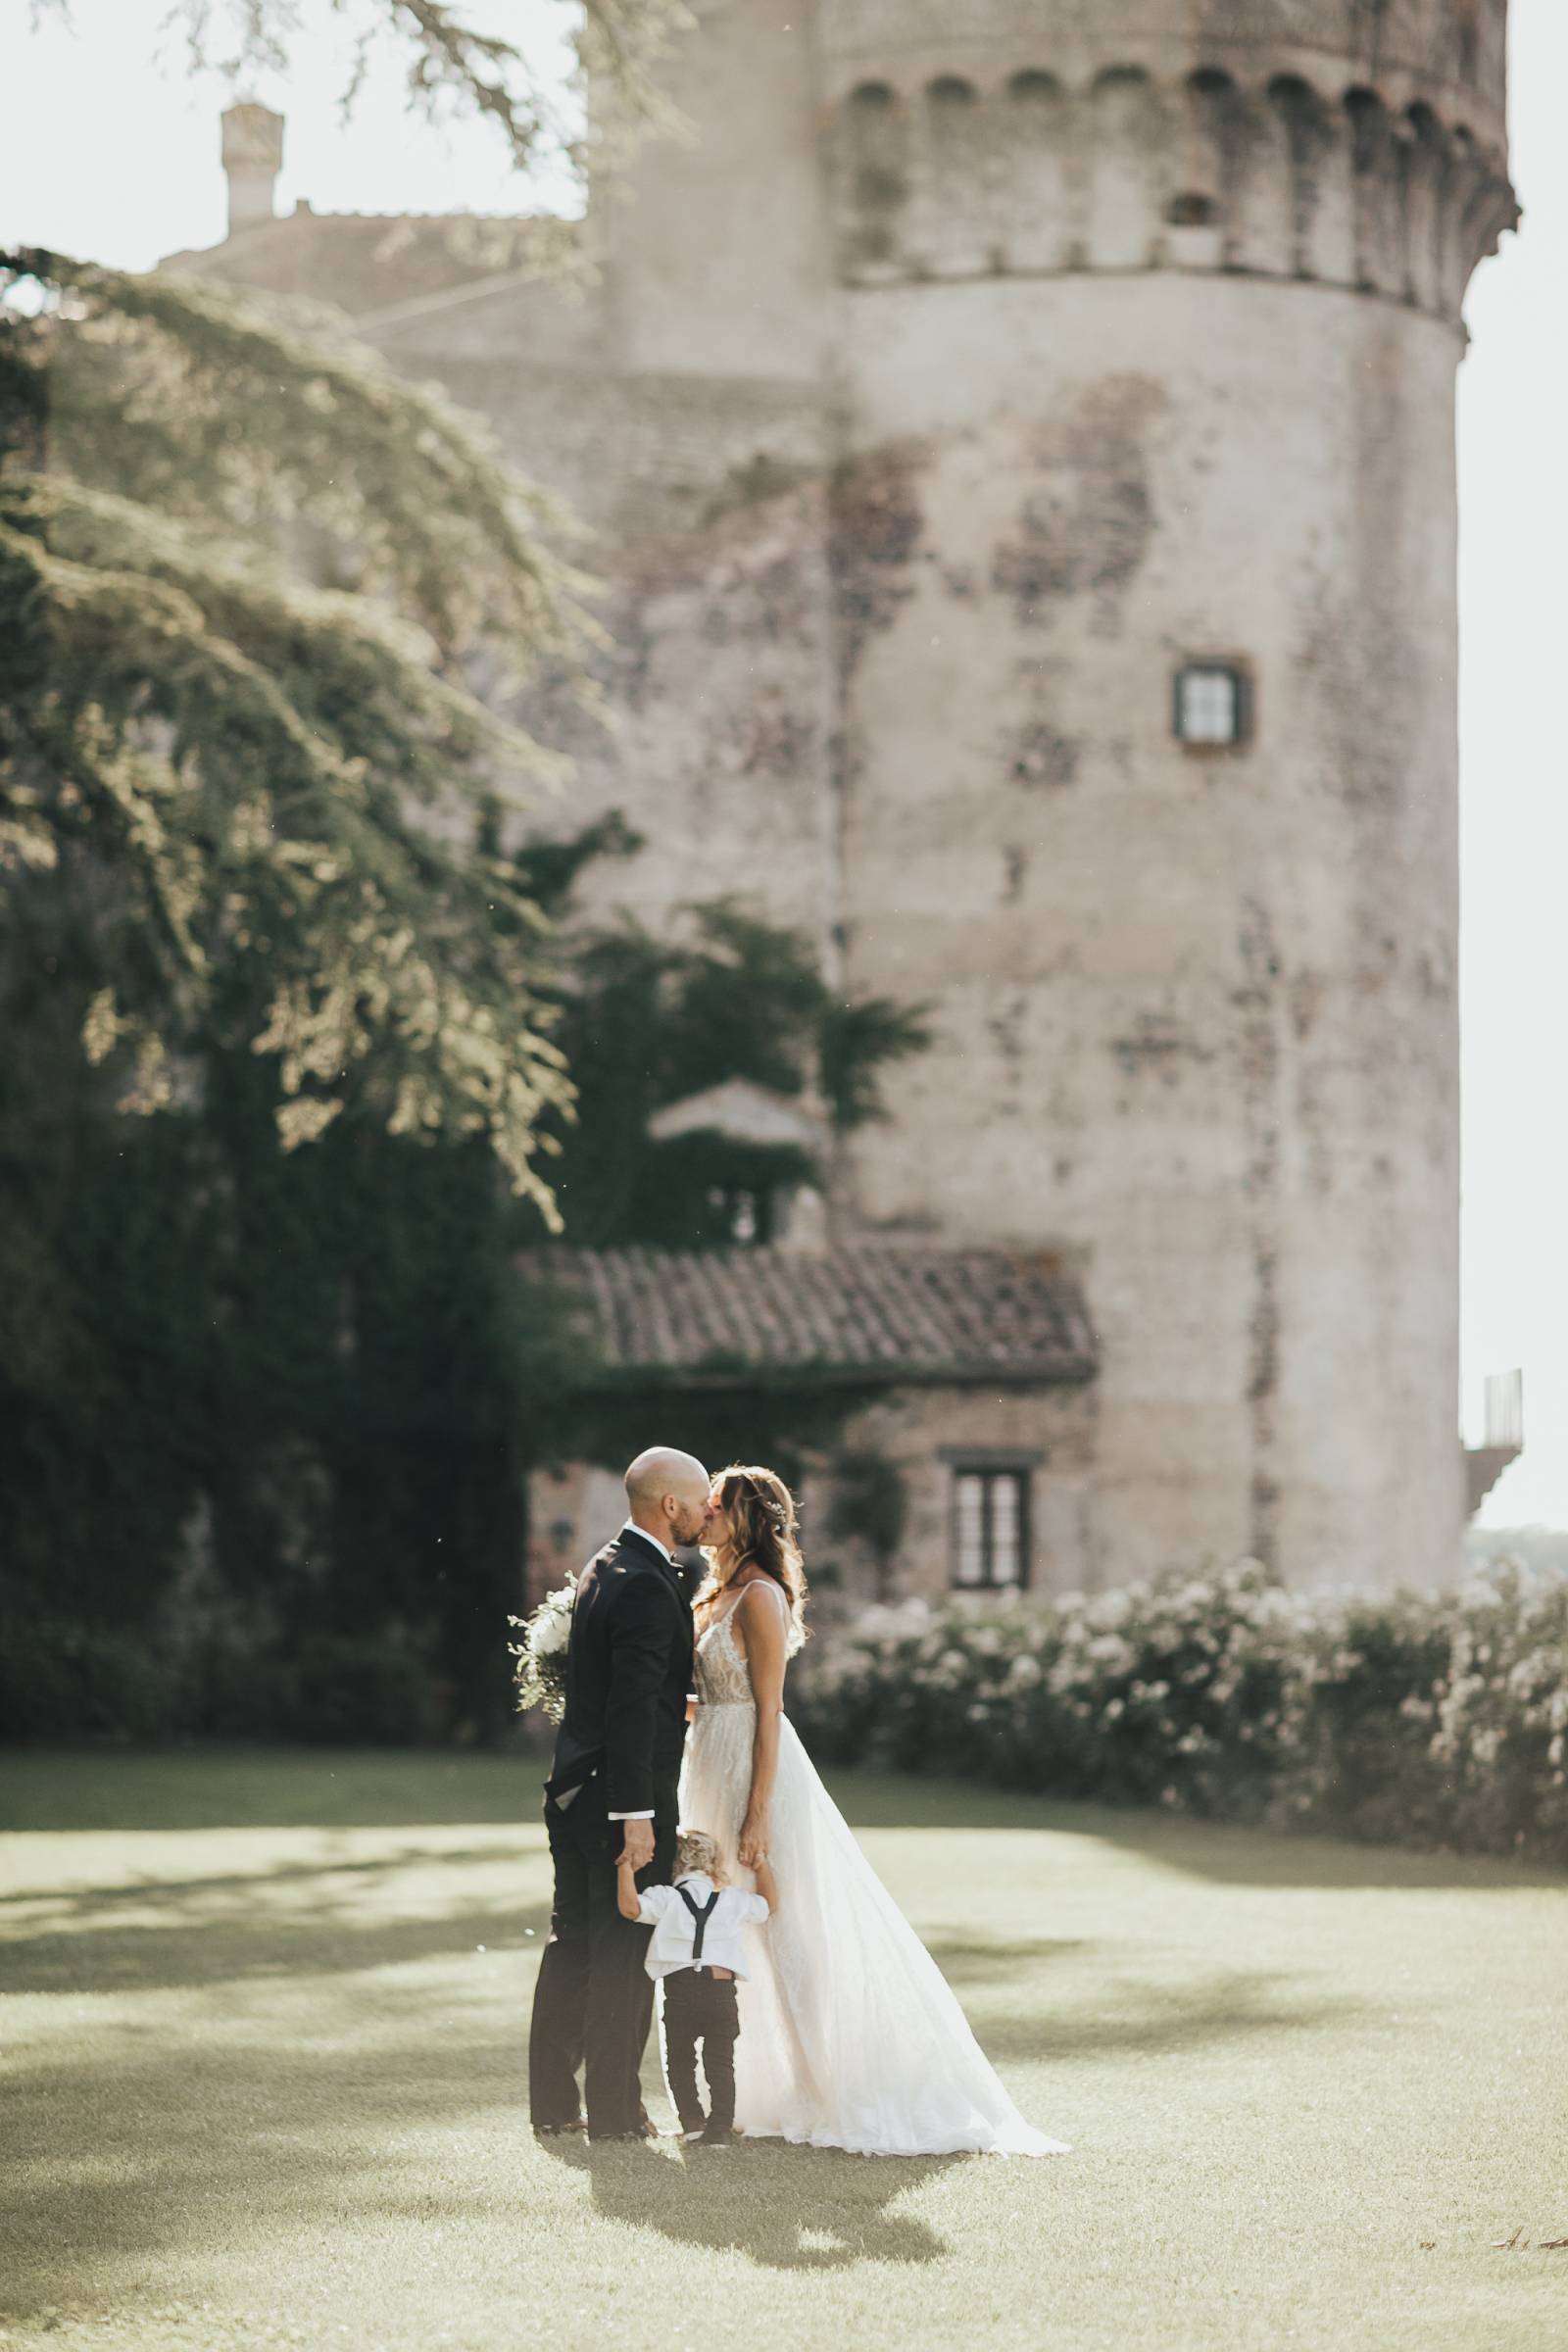 Lakeside Castle Elopement in Italy